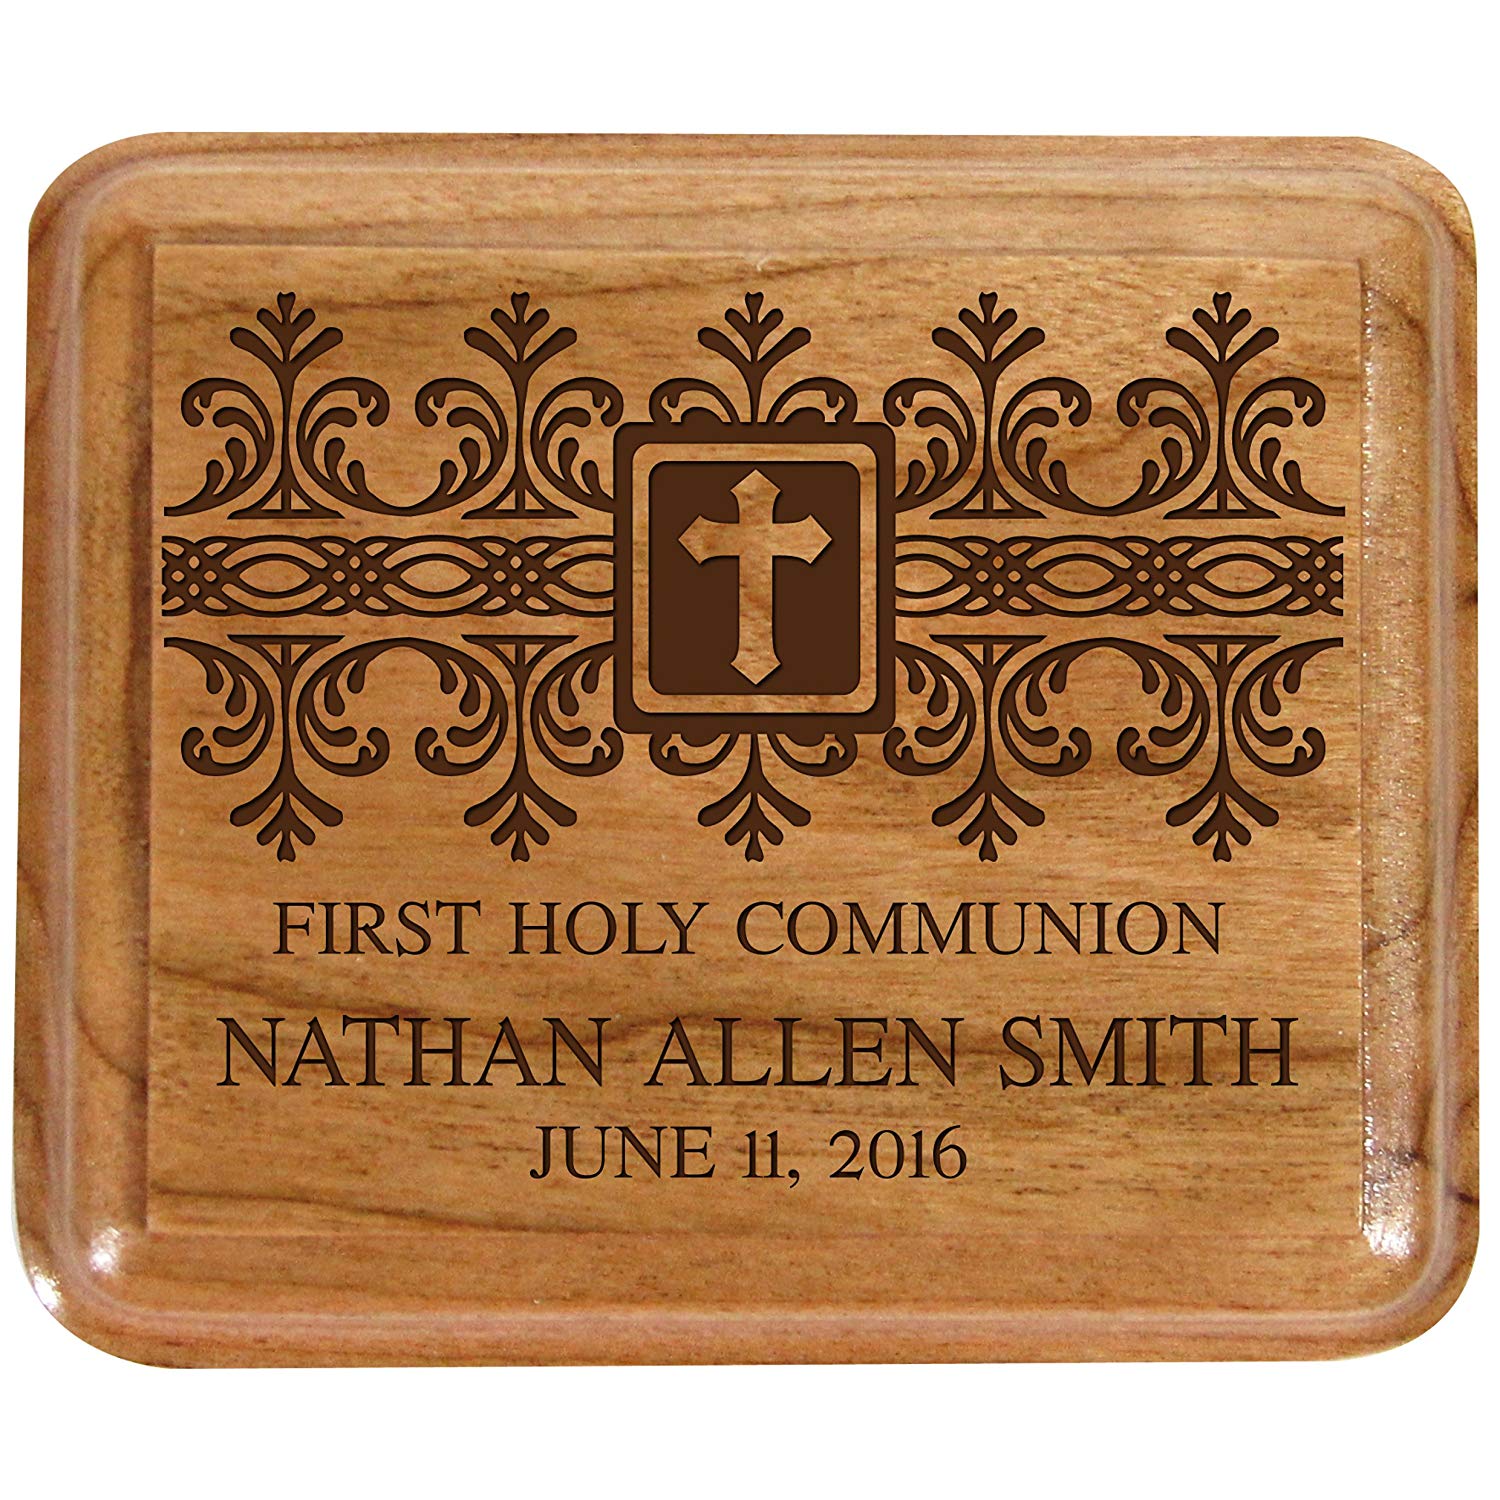 LifeSong Milestones Personalized First Holy Communion Keepsake Jewelry Box Gift for Boys and Girls